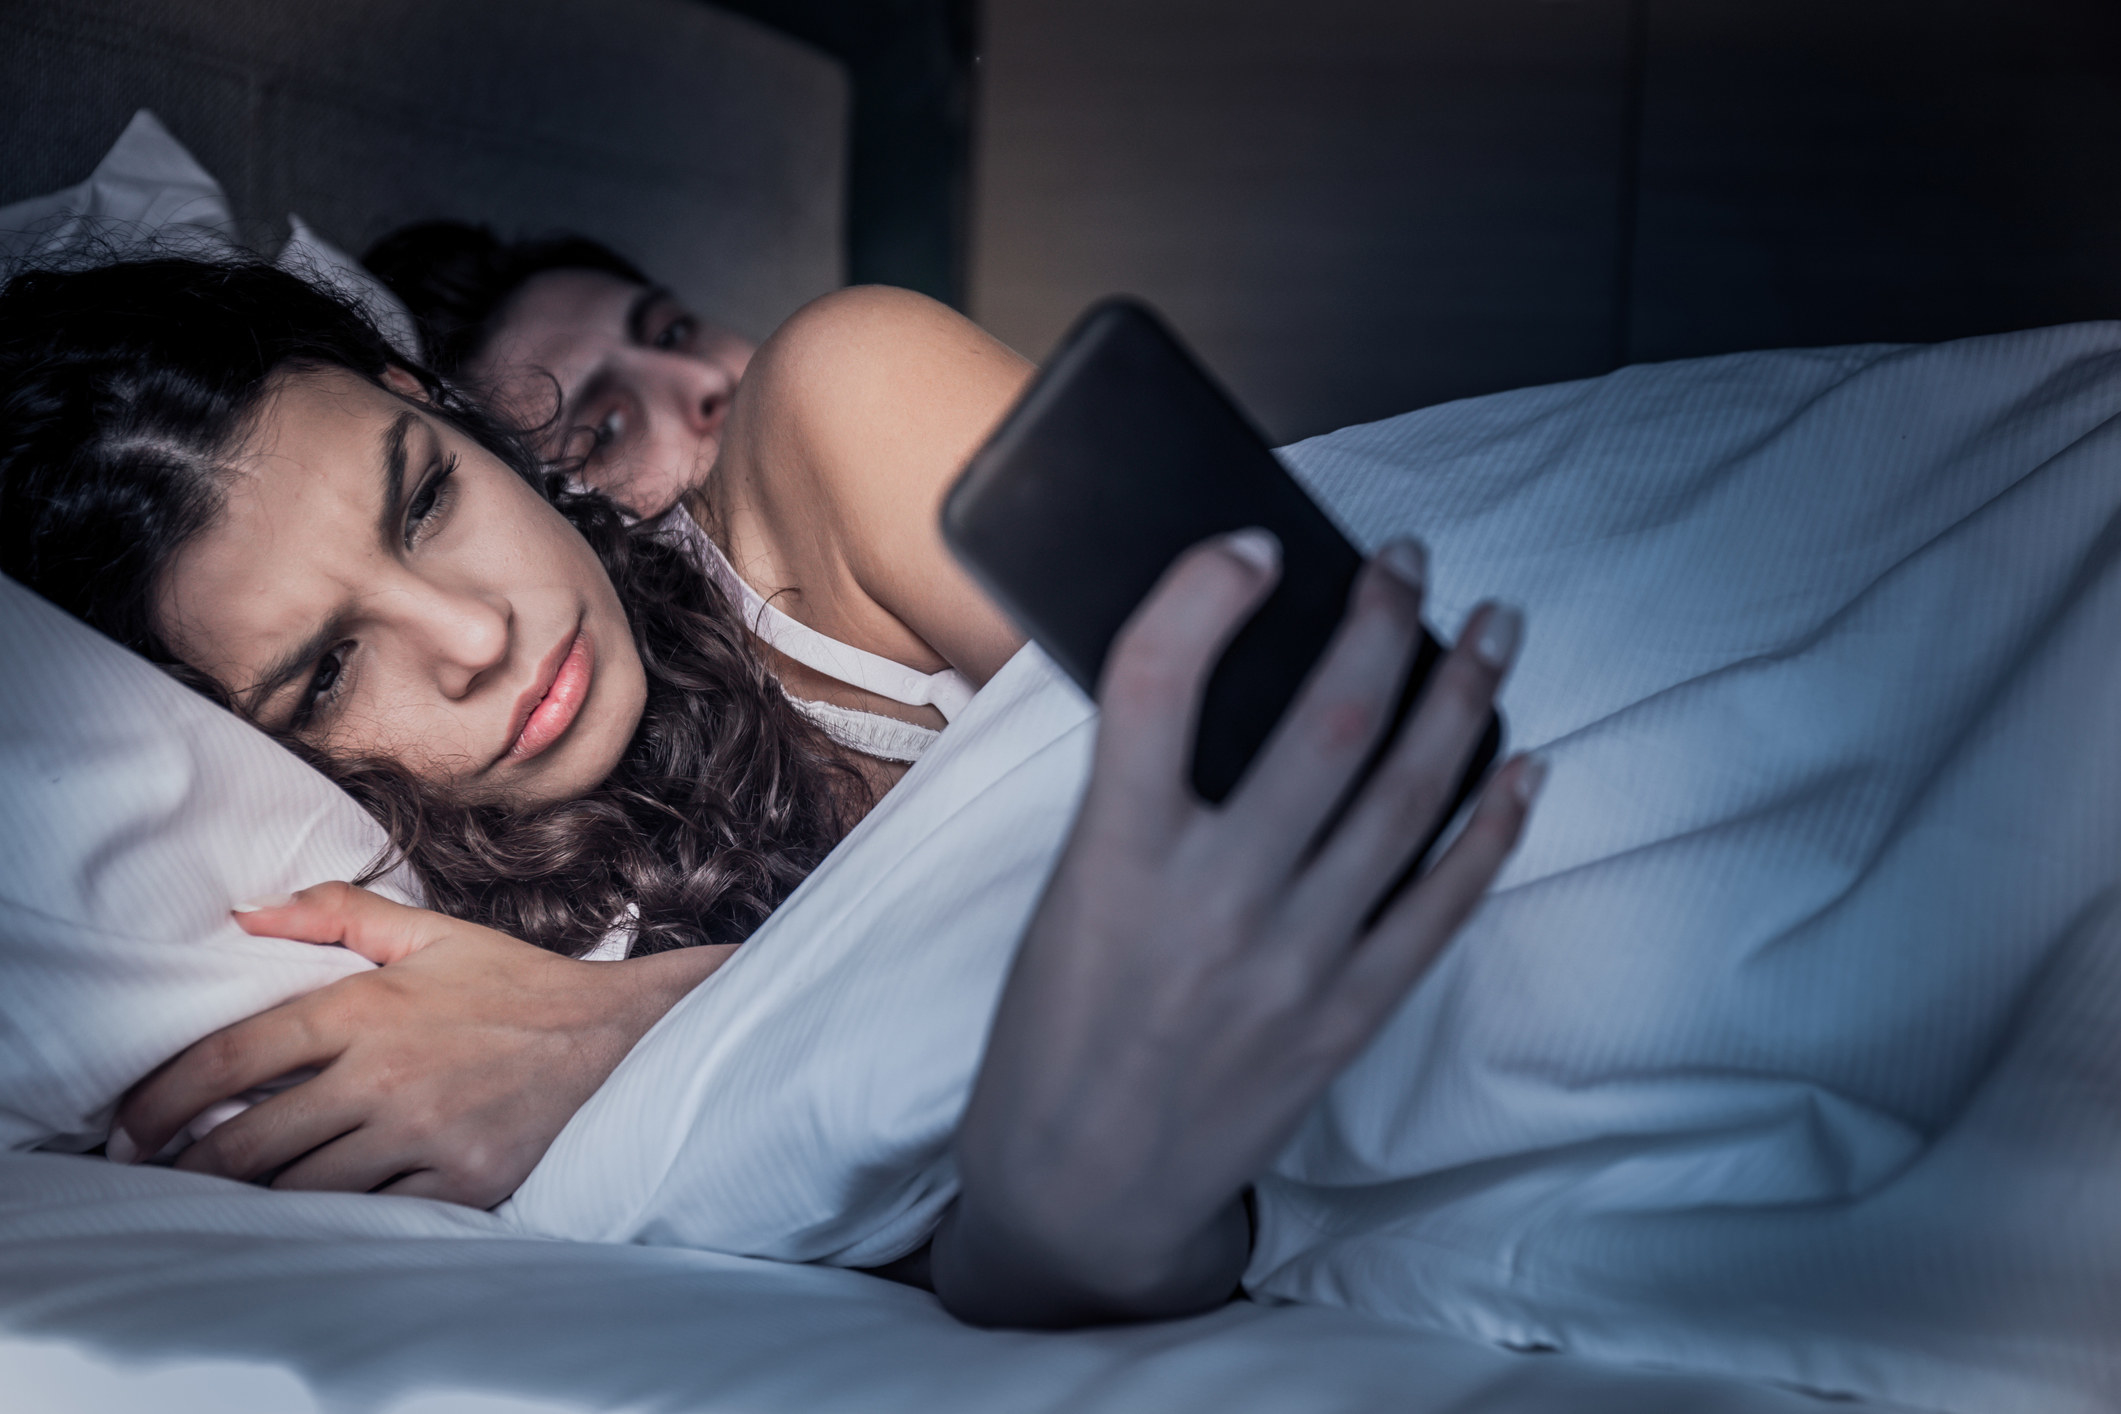 Man stares at woman in bed on her phone